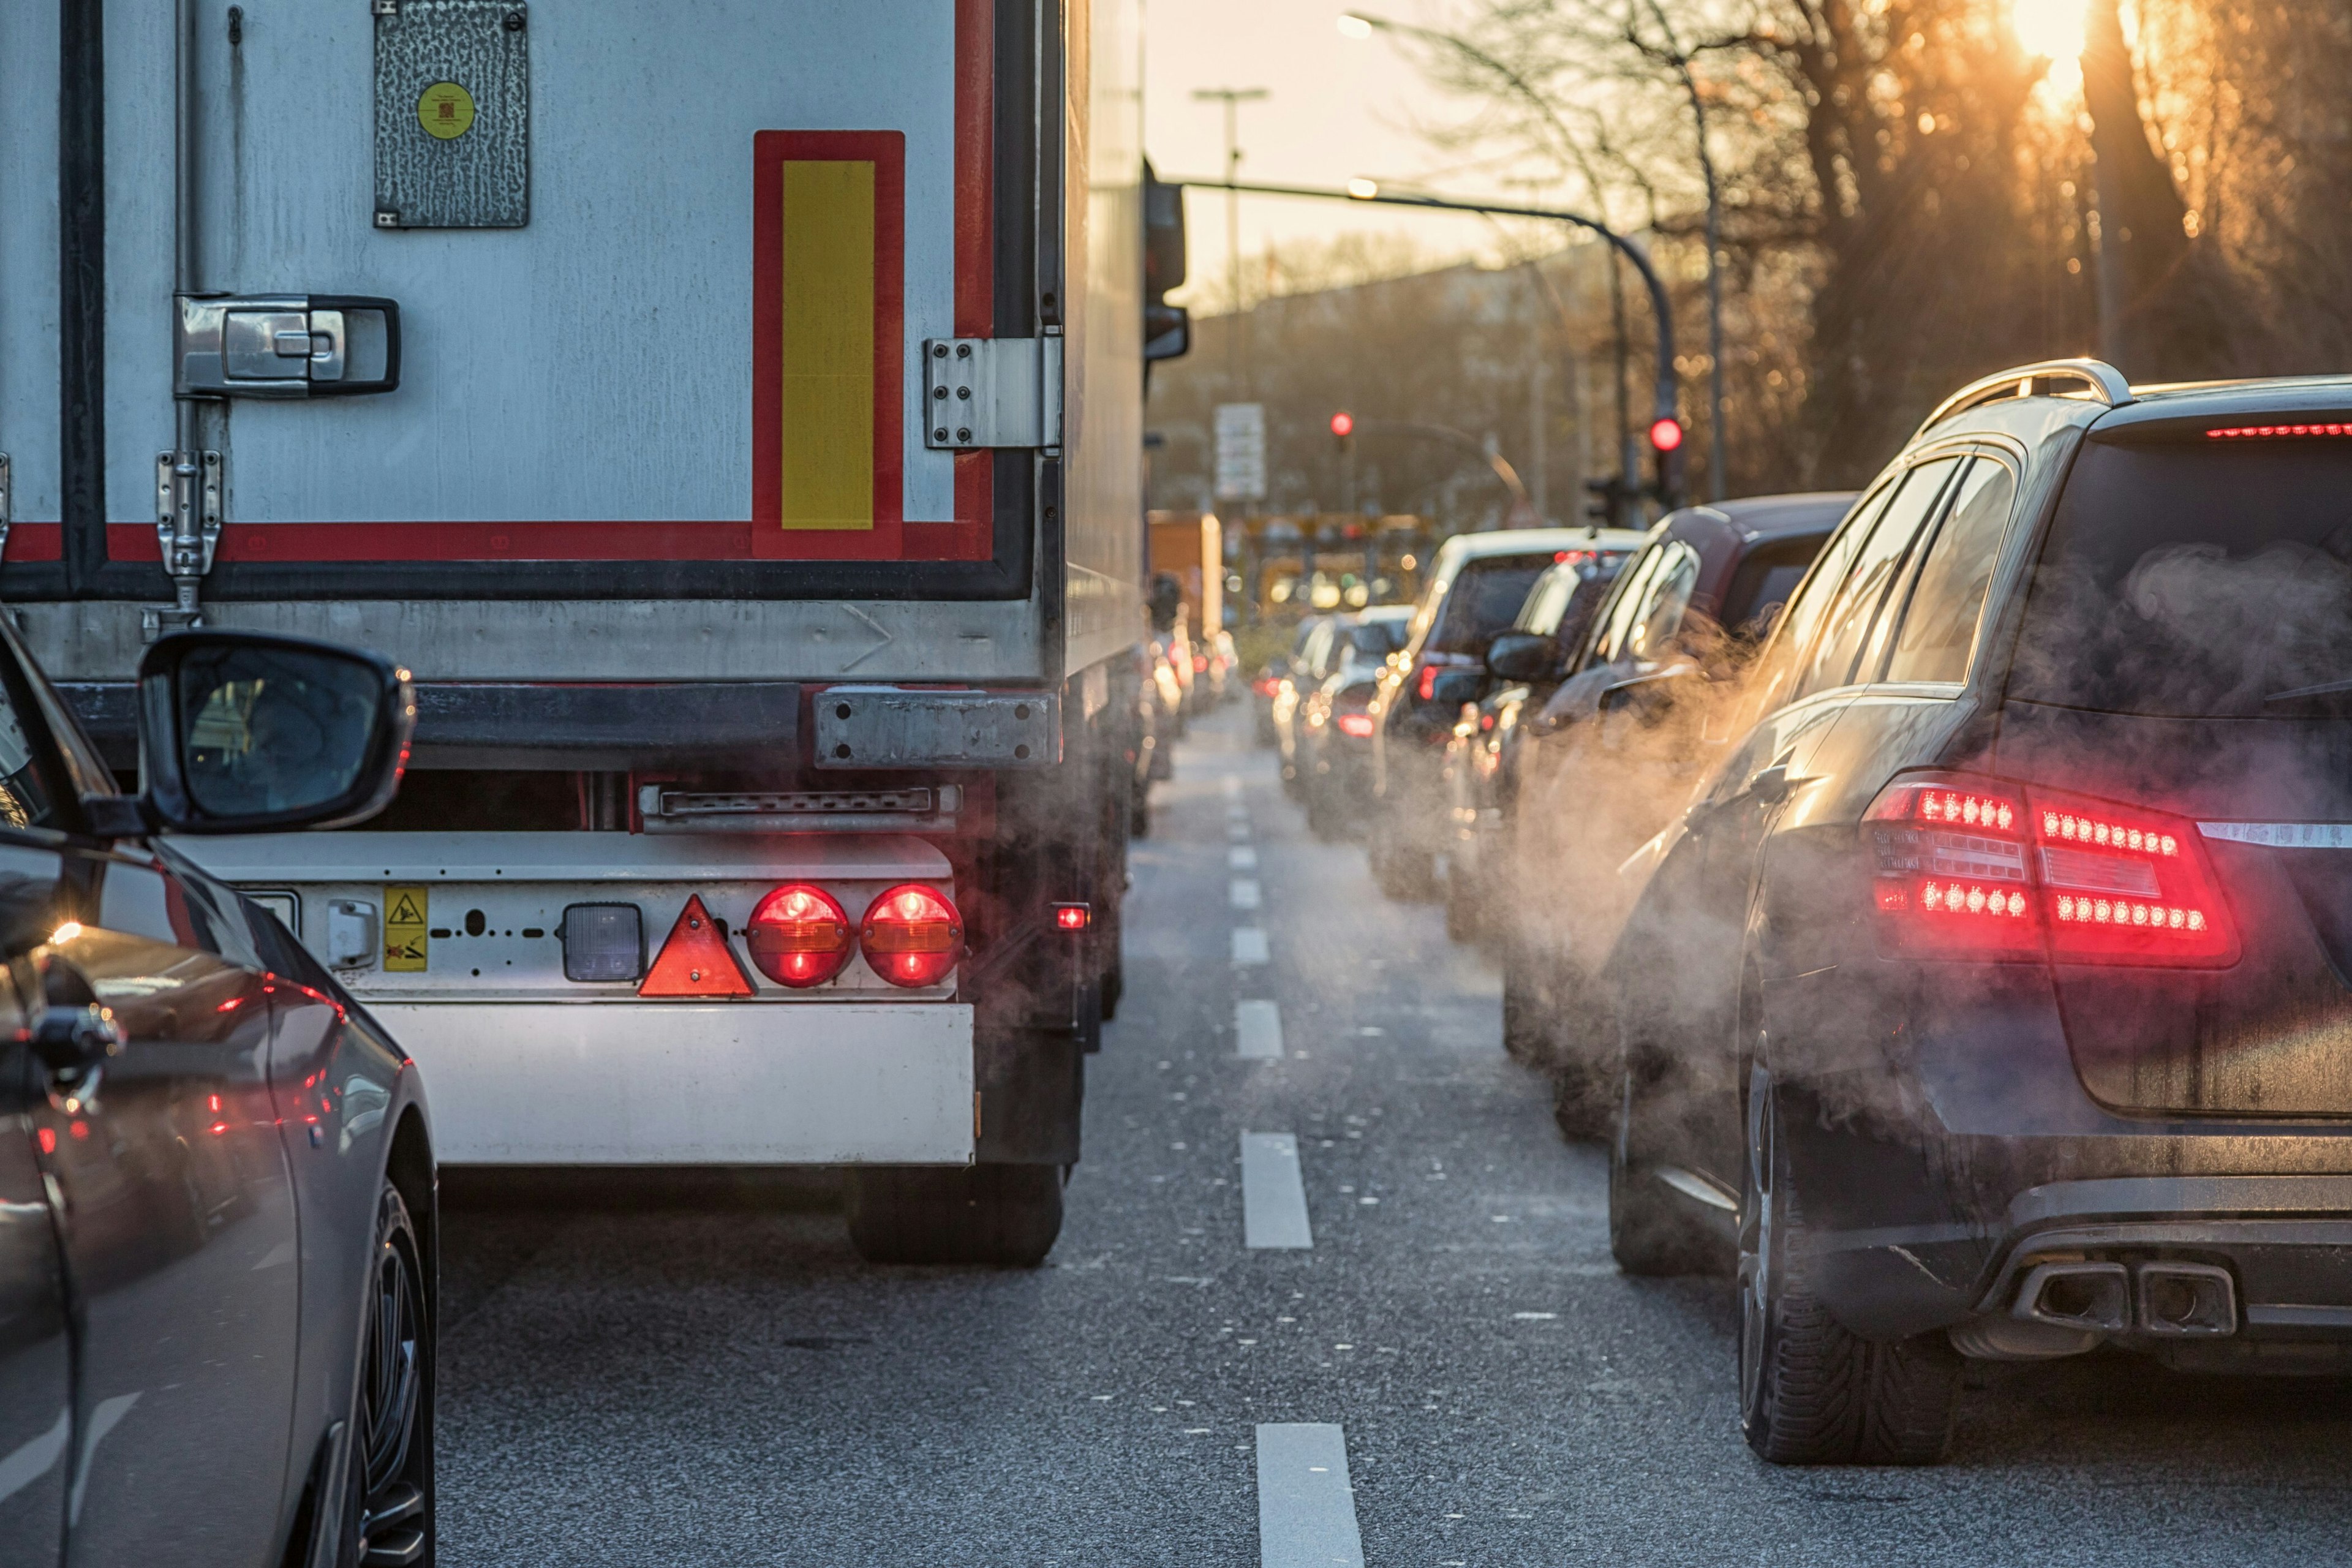 car exhaust pollution and why we need to monitor around schools